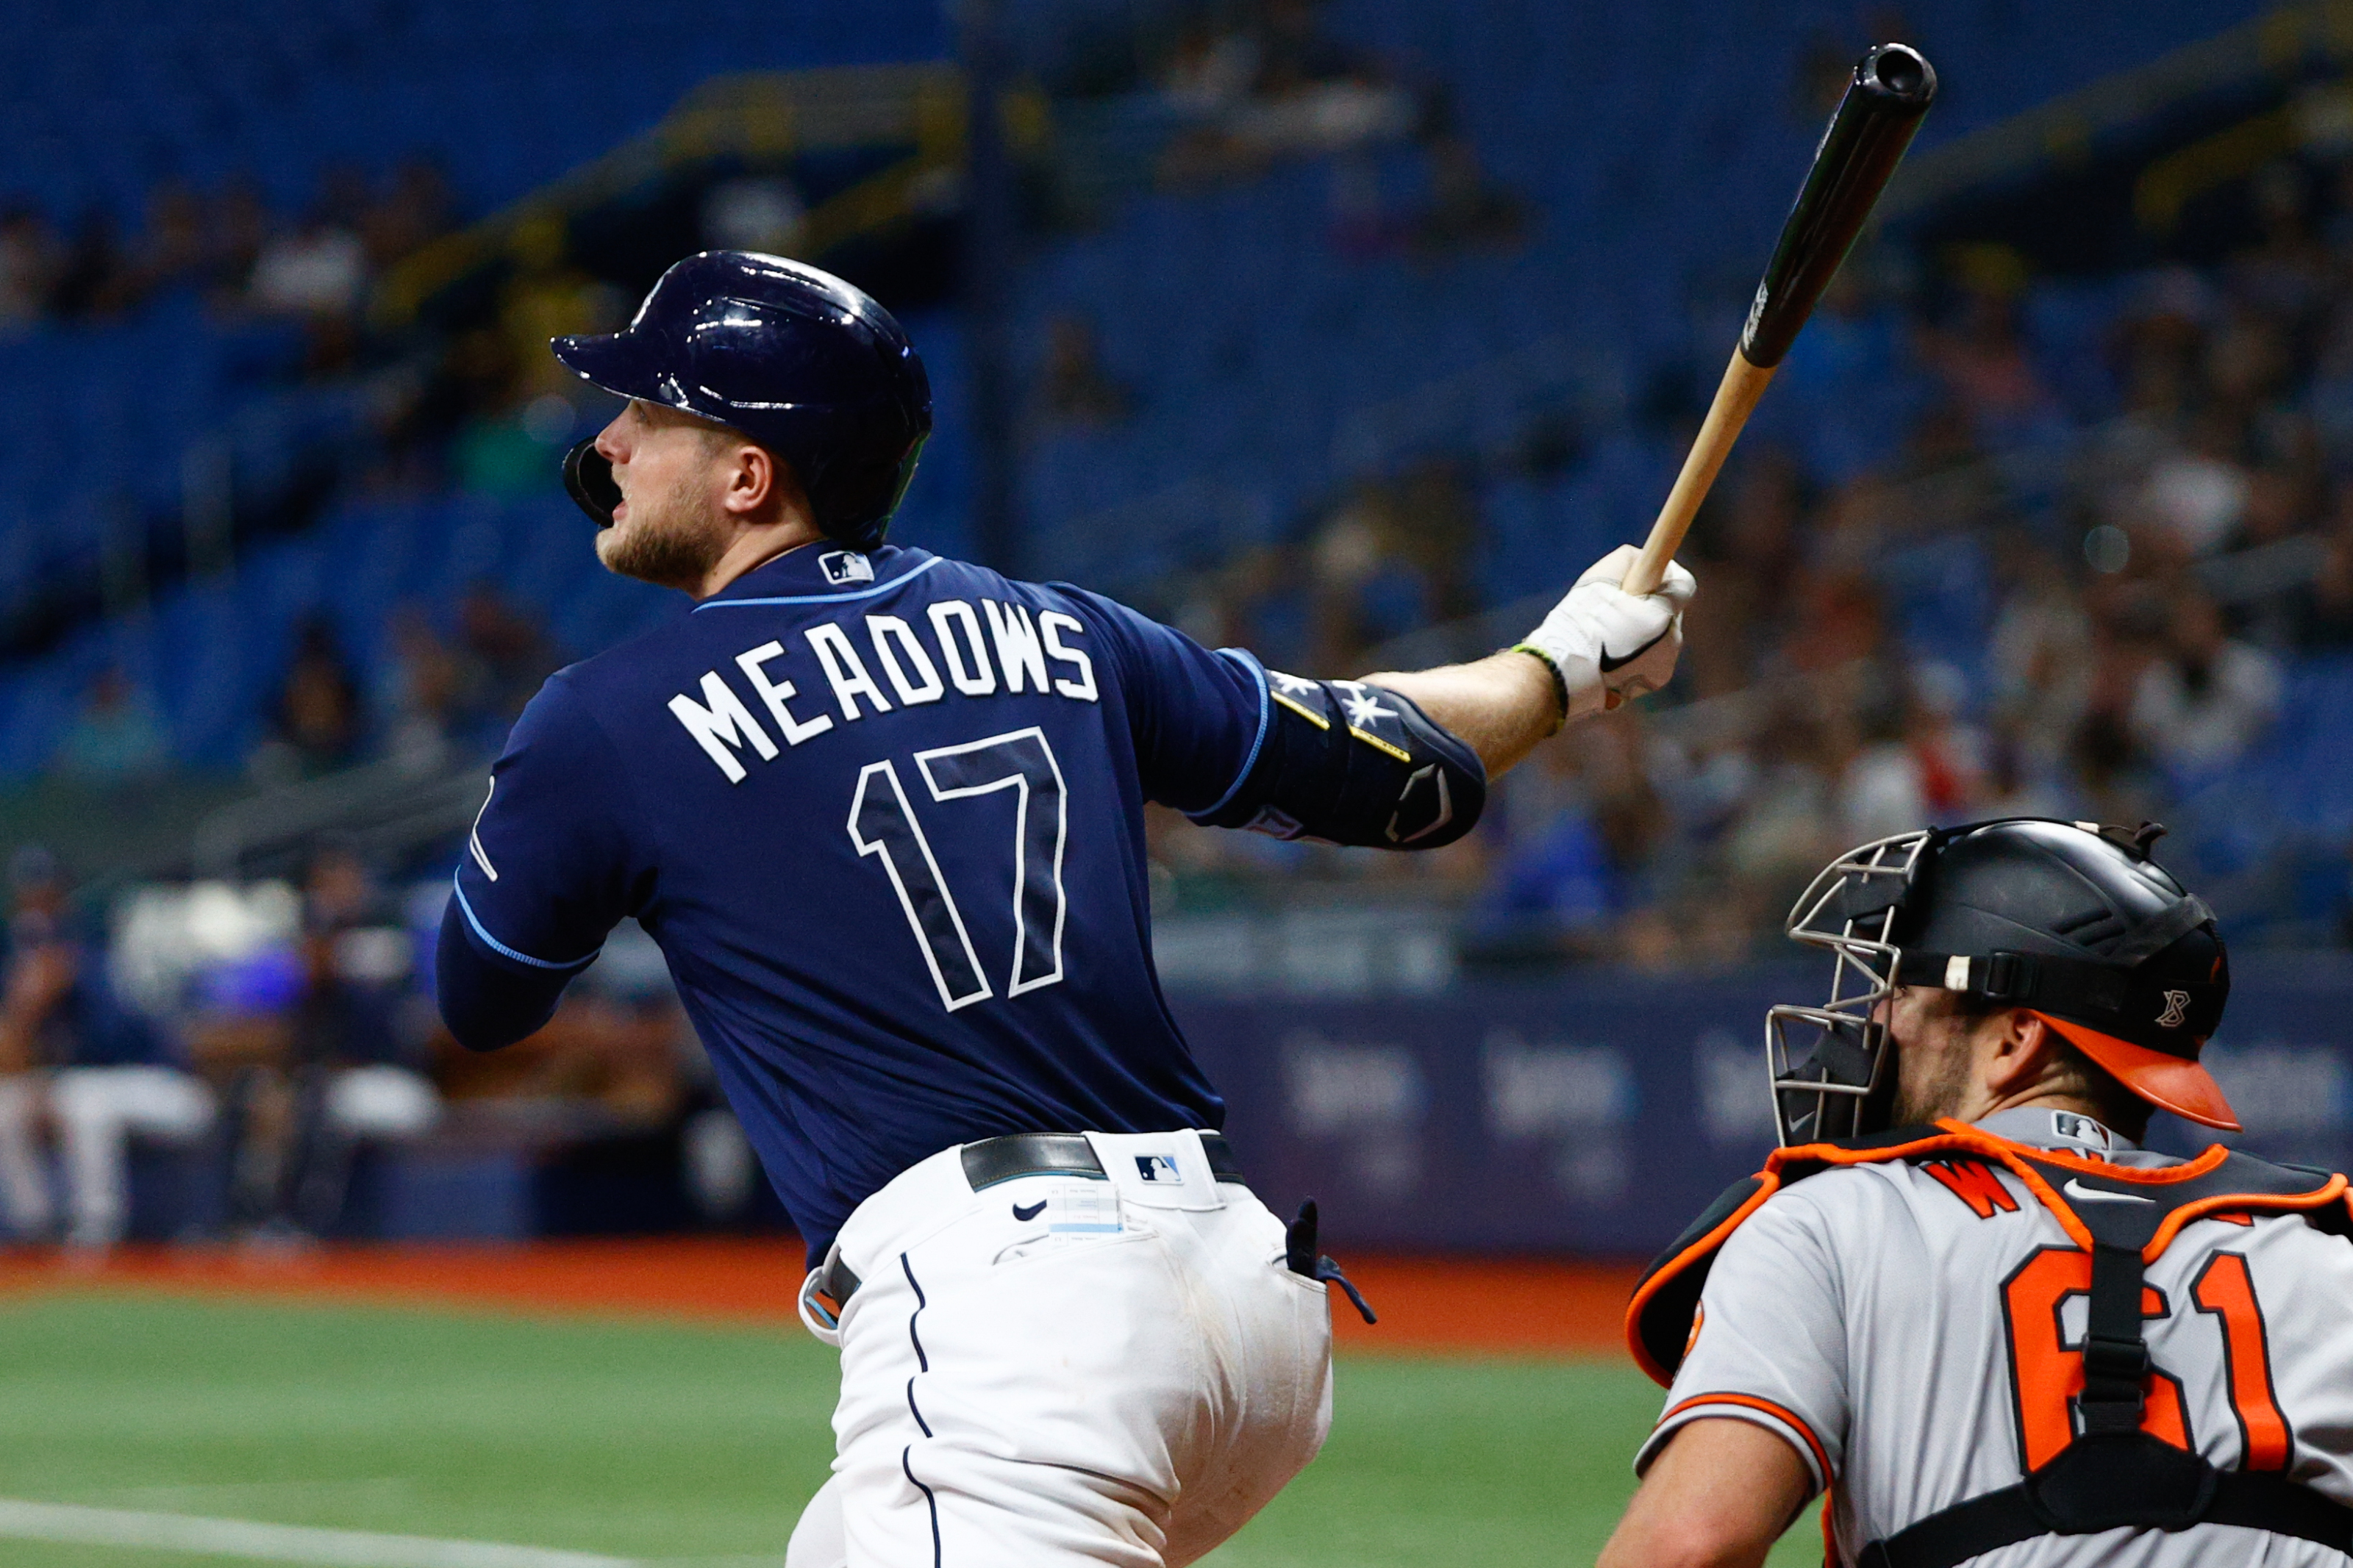 Analyzing what Austin Meadows brings to the Detroit Tigers